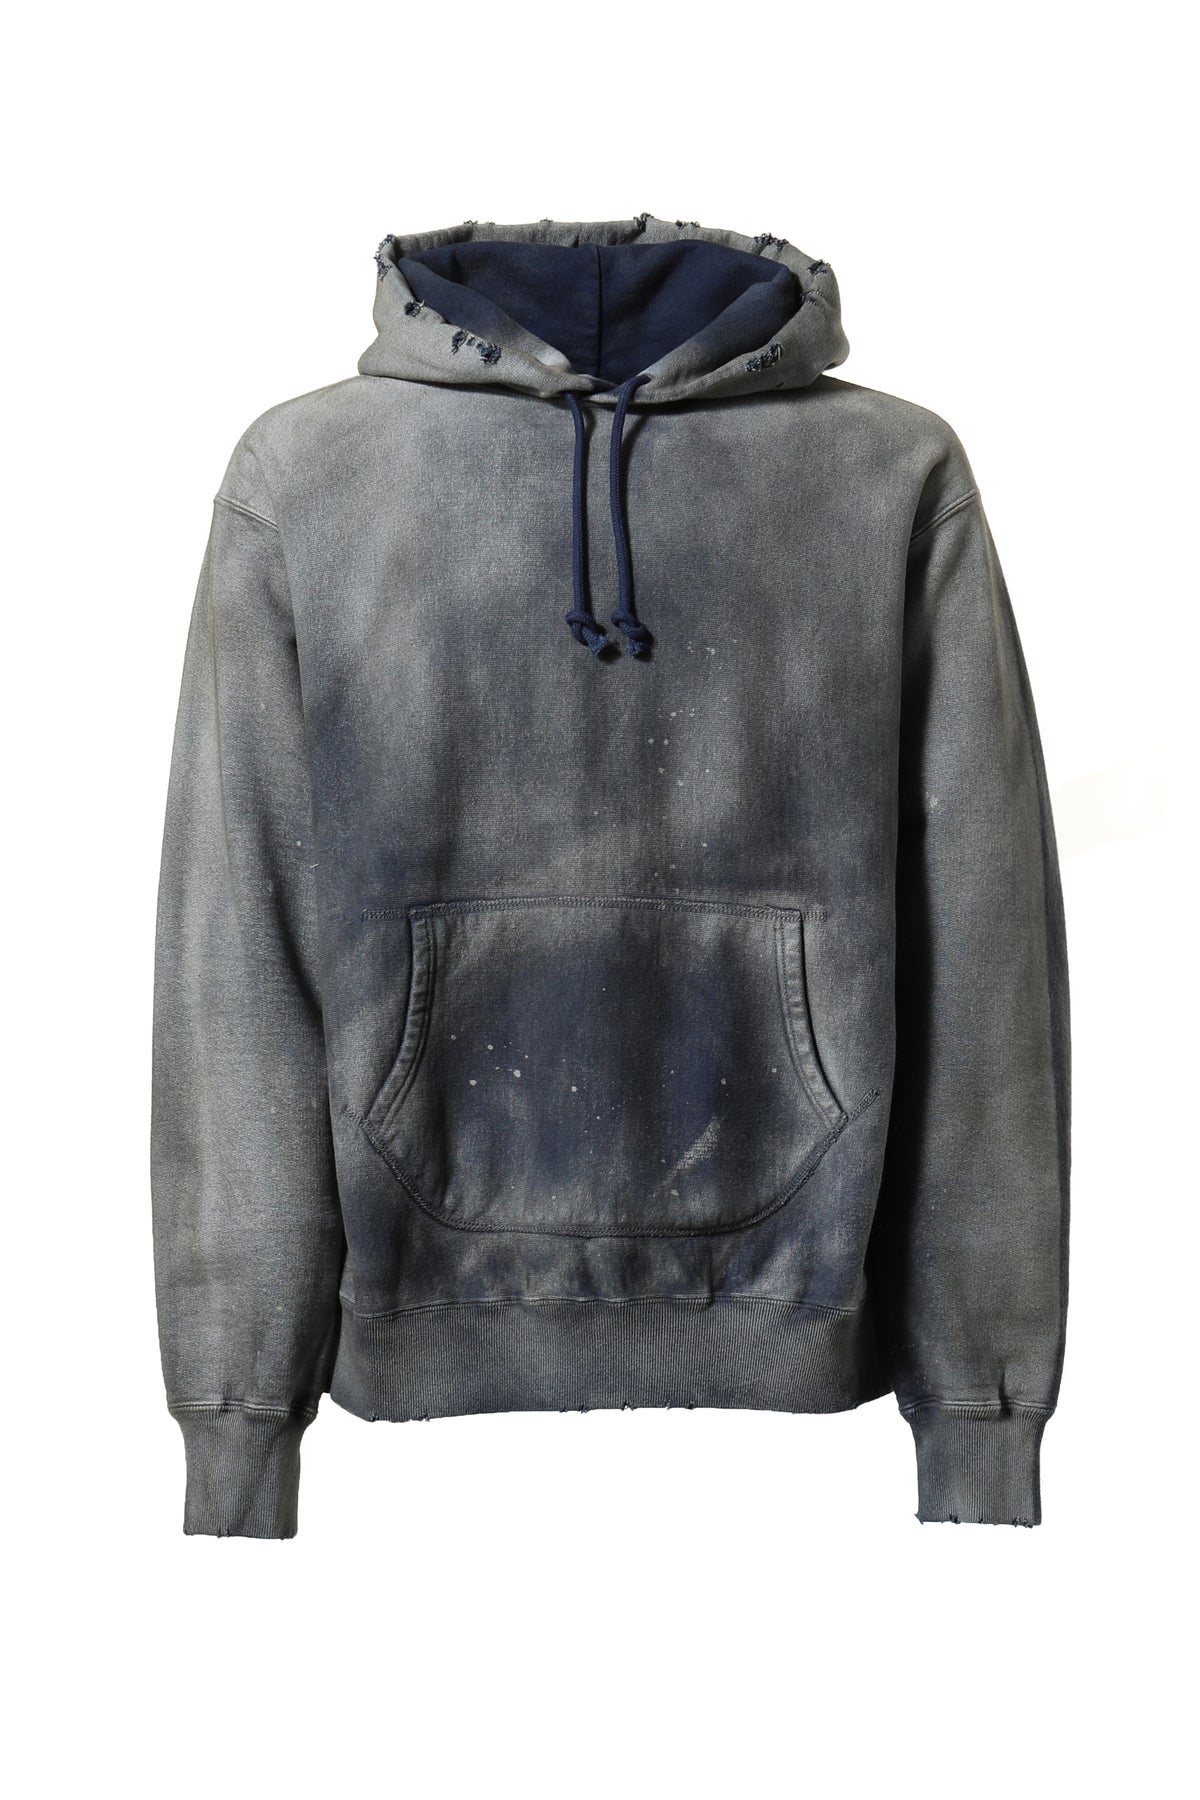 BOW WOW HARD AGEING HOODIE / NVY HARD AGEING